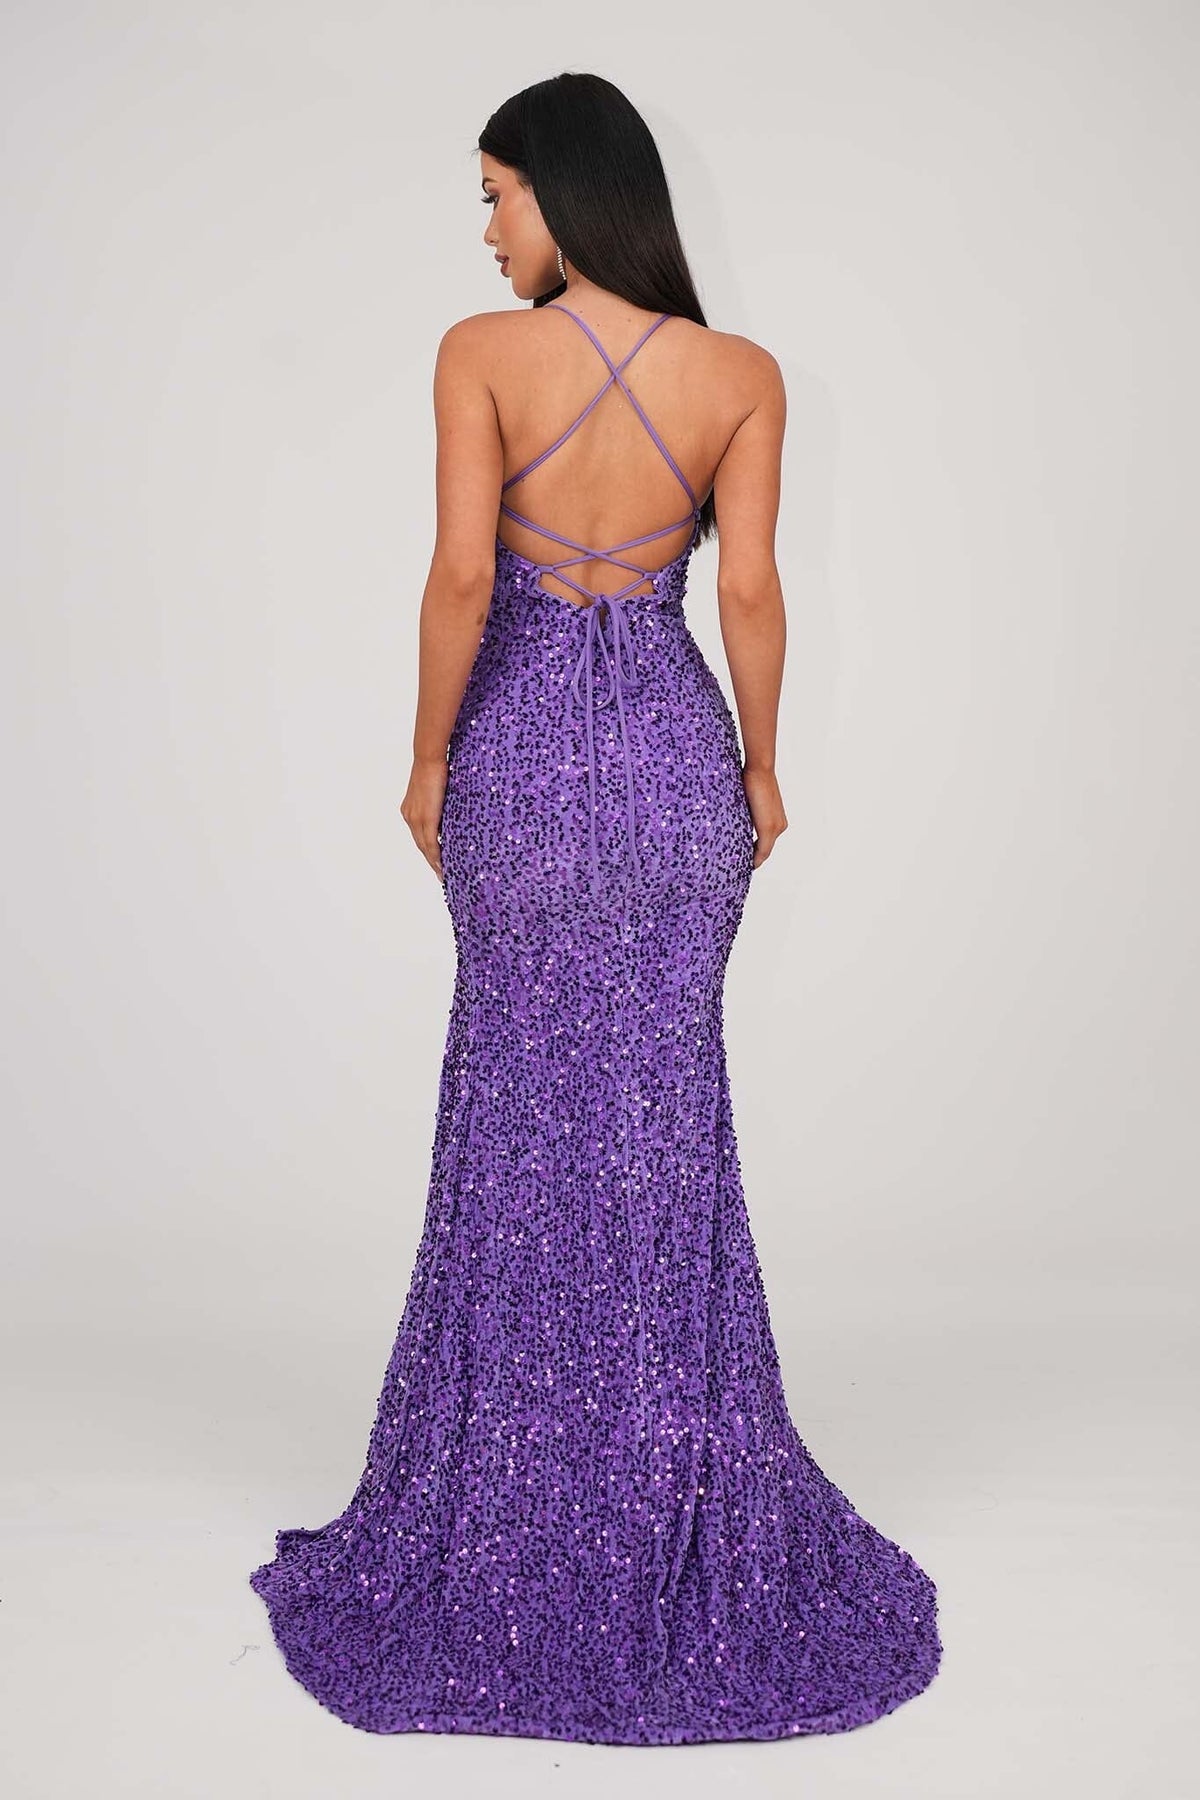 Back Image of Purple Velvet Sequin Full Length Evening Gown with V Neckline, Thin Shoulder Straps, Thigh High Side Split, Lace Up Open Back and Small Train